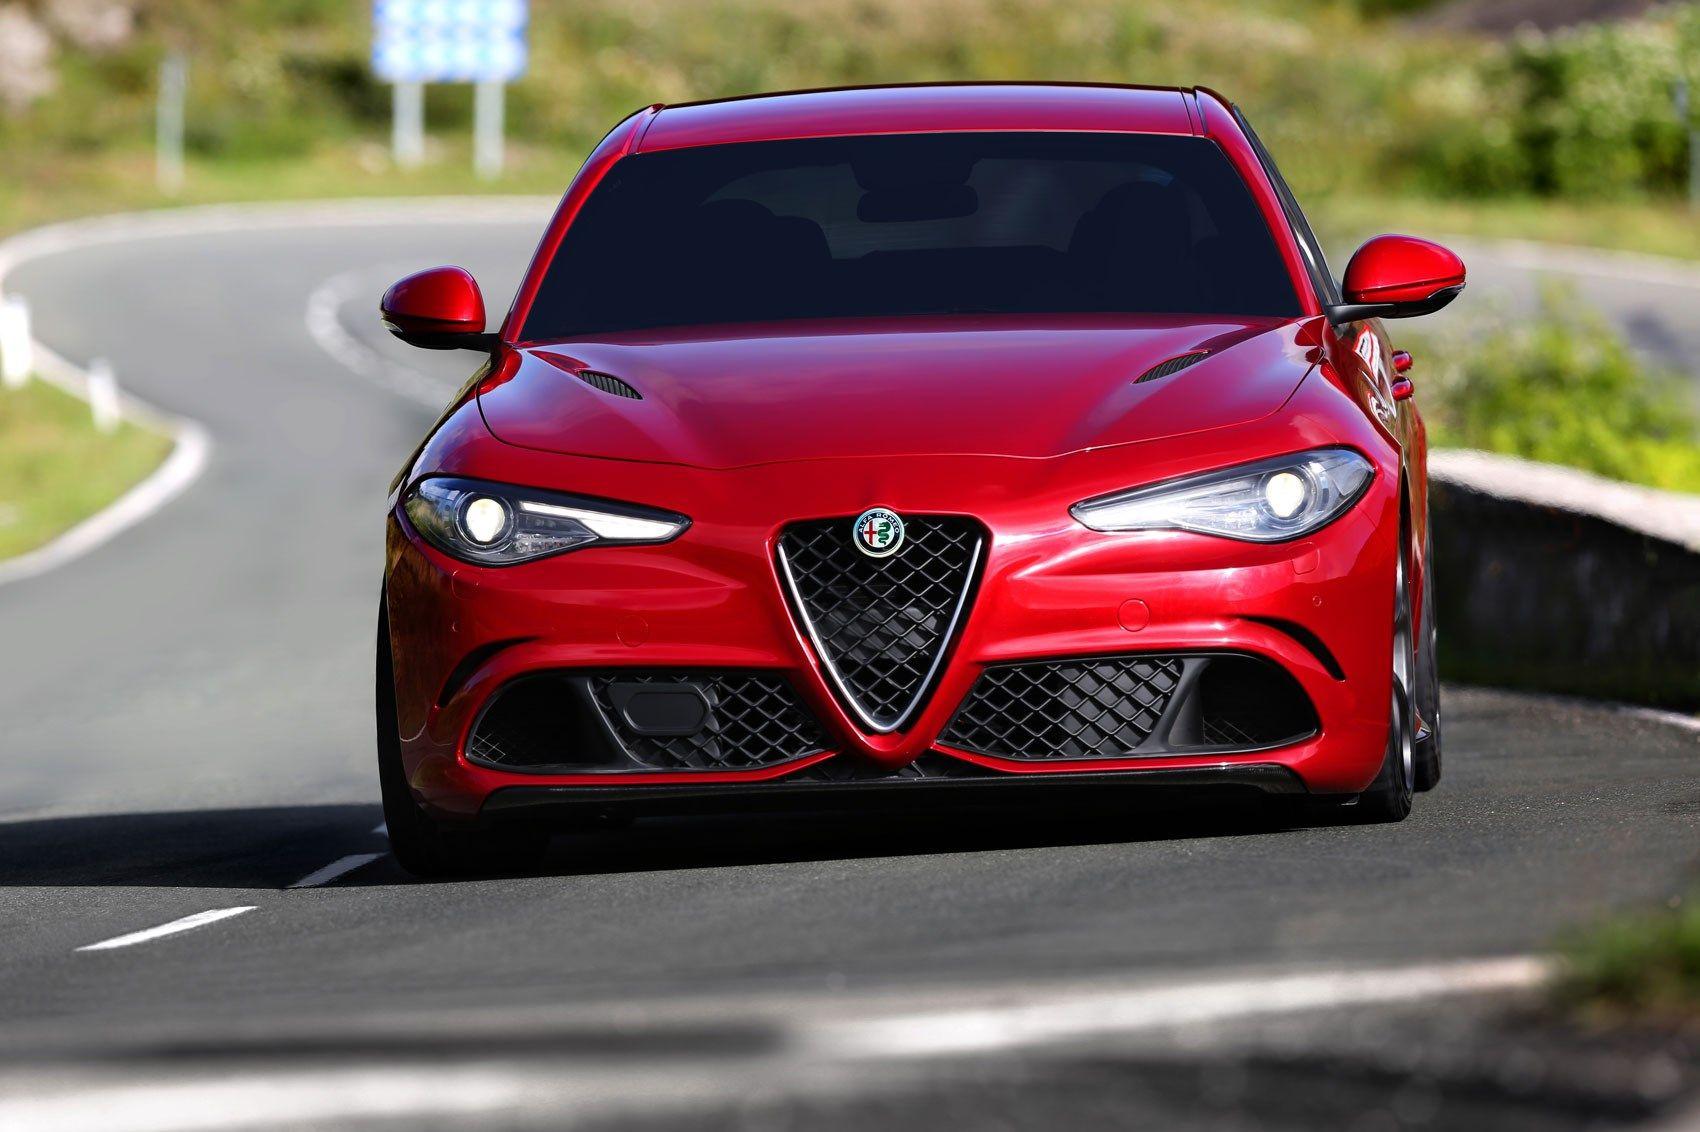 Alfa Romeo Giulia (2016) in picture and on video: it's the new